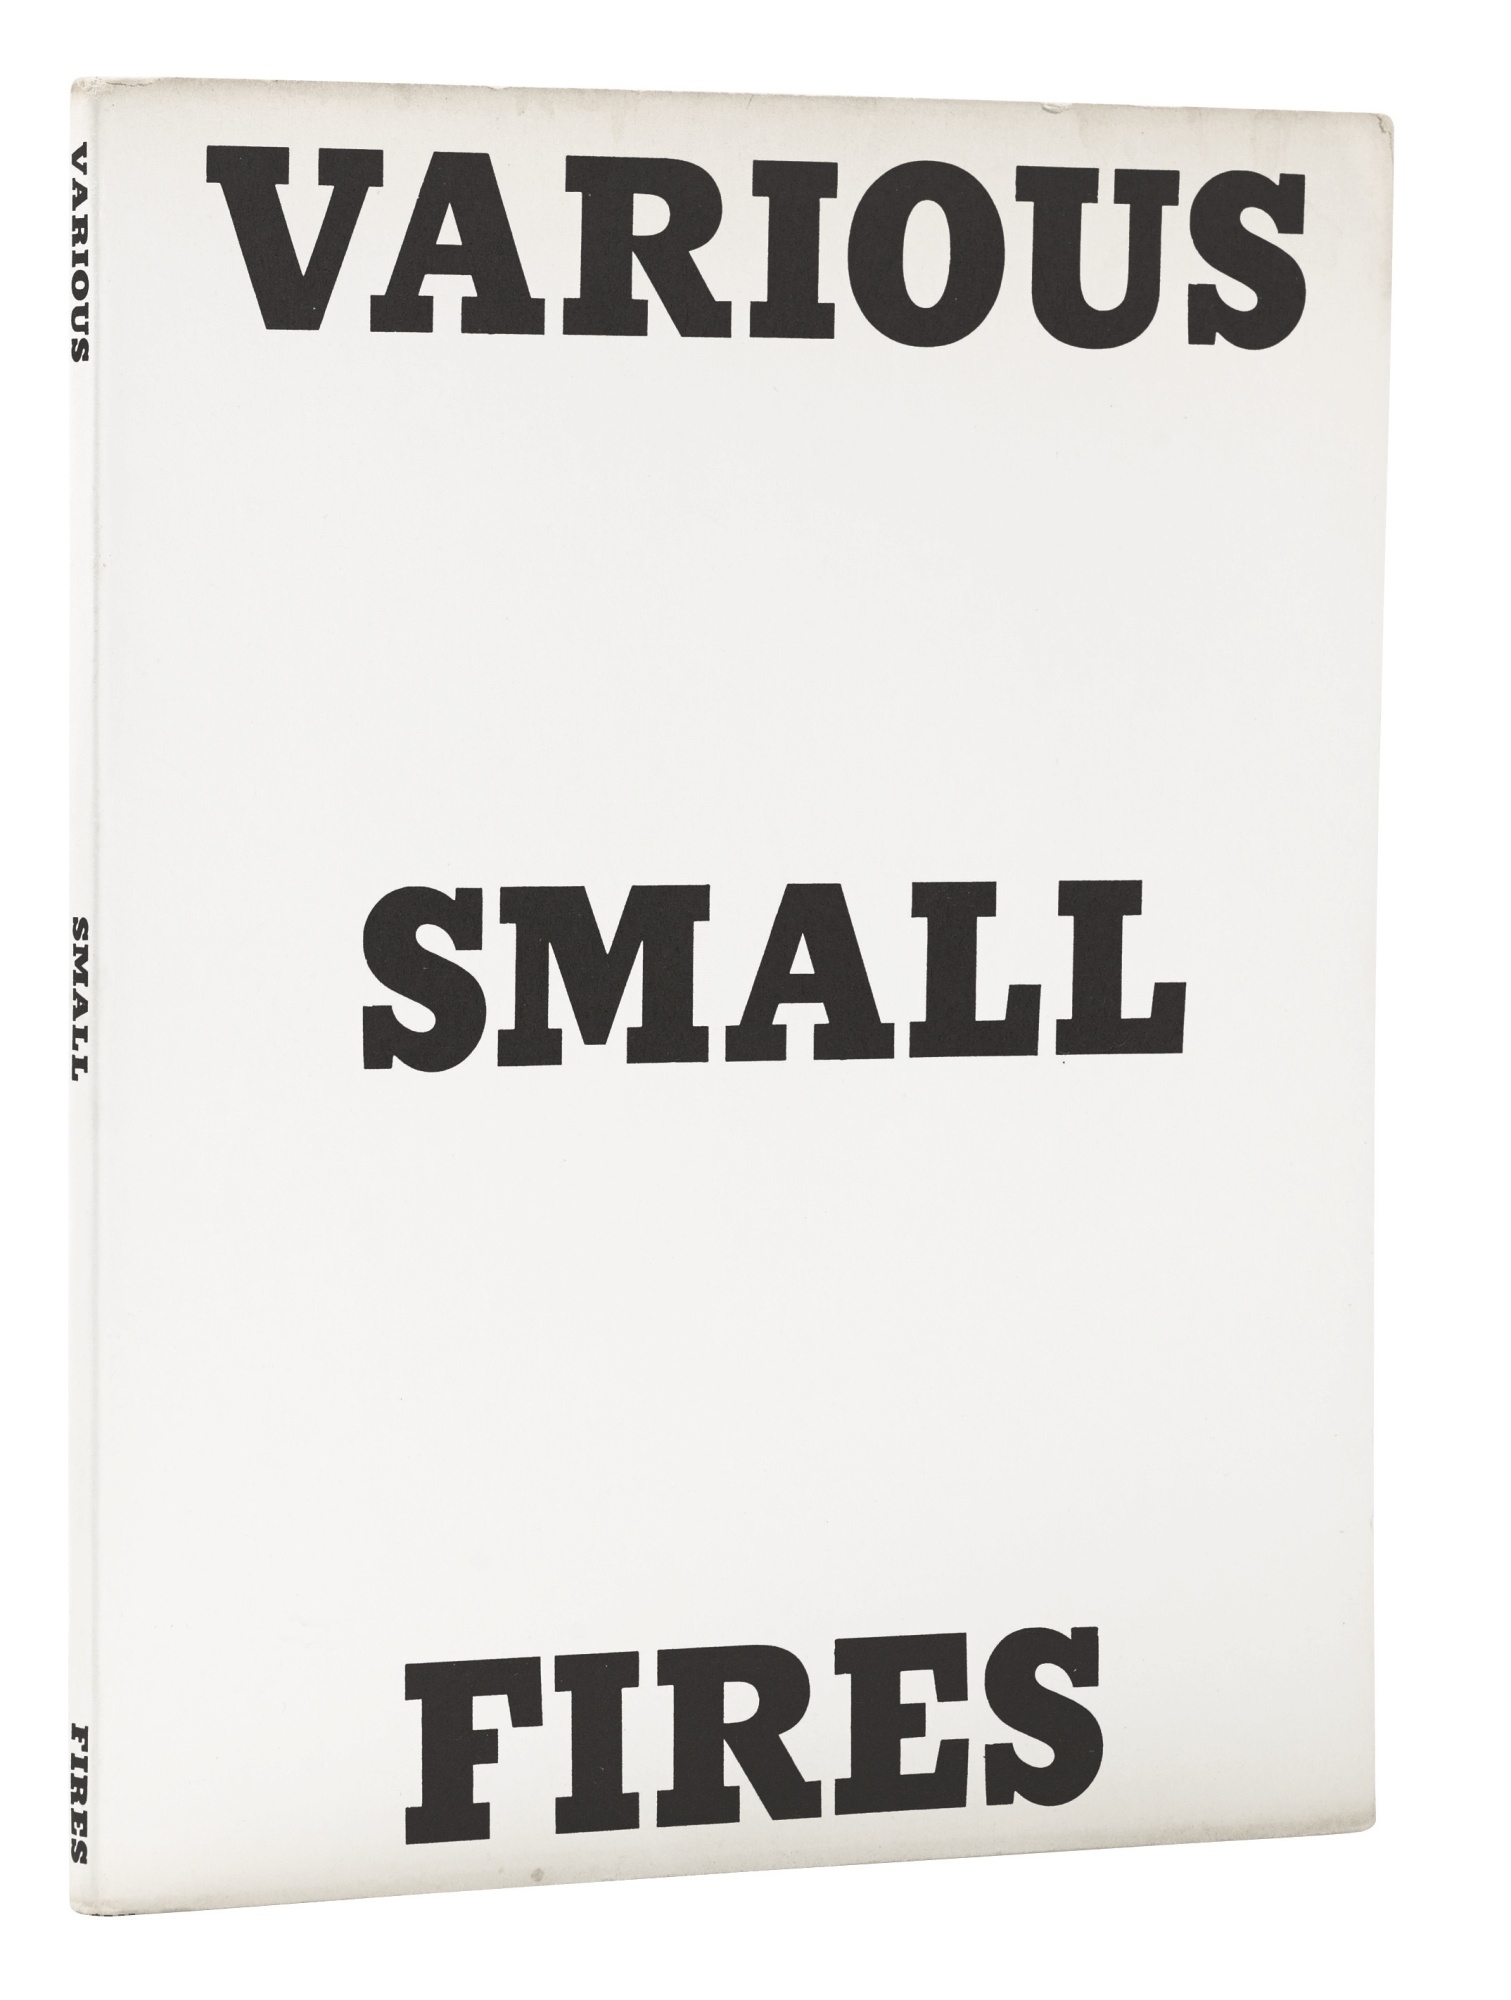 TWENTYSIX GASOLINE STATIONS; AND VARIOUS SMALL FIRES (MINNEAPOLIS INSTITUTE OF ART BOOKS 1; AND 2) by Ed Ruscha, 1962-1964